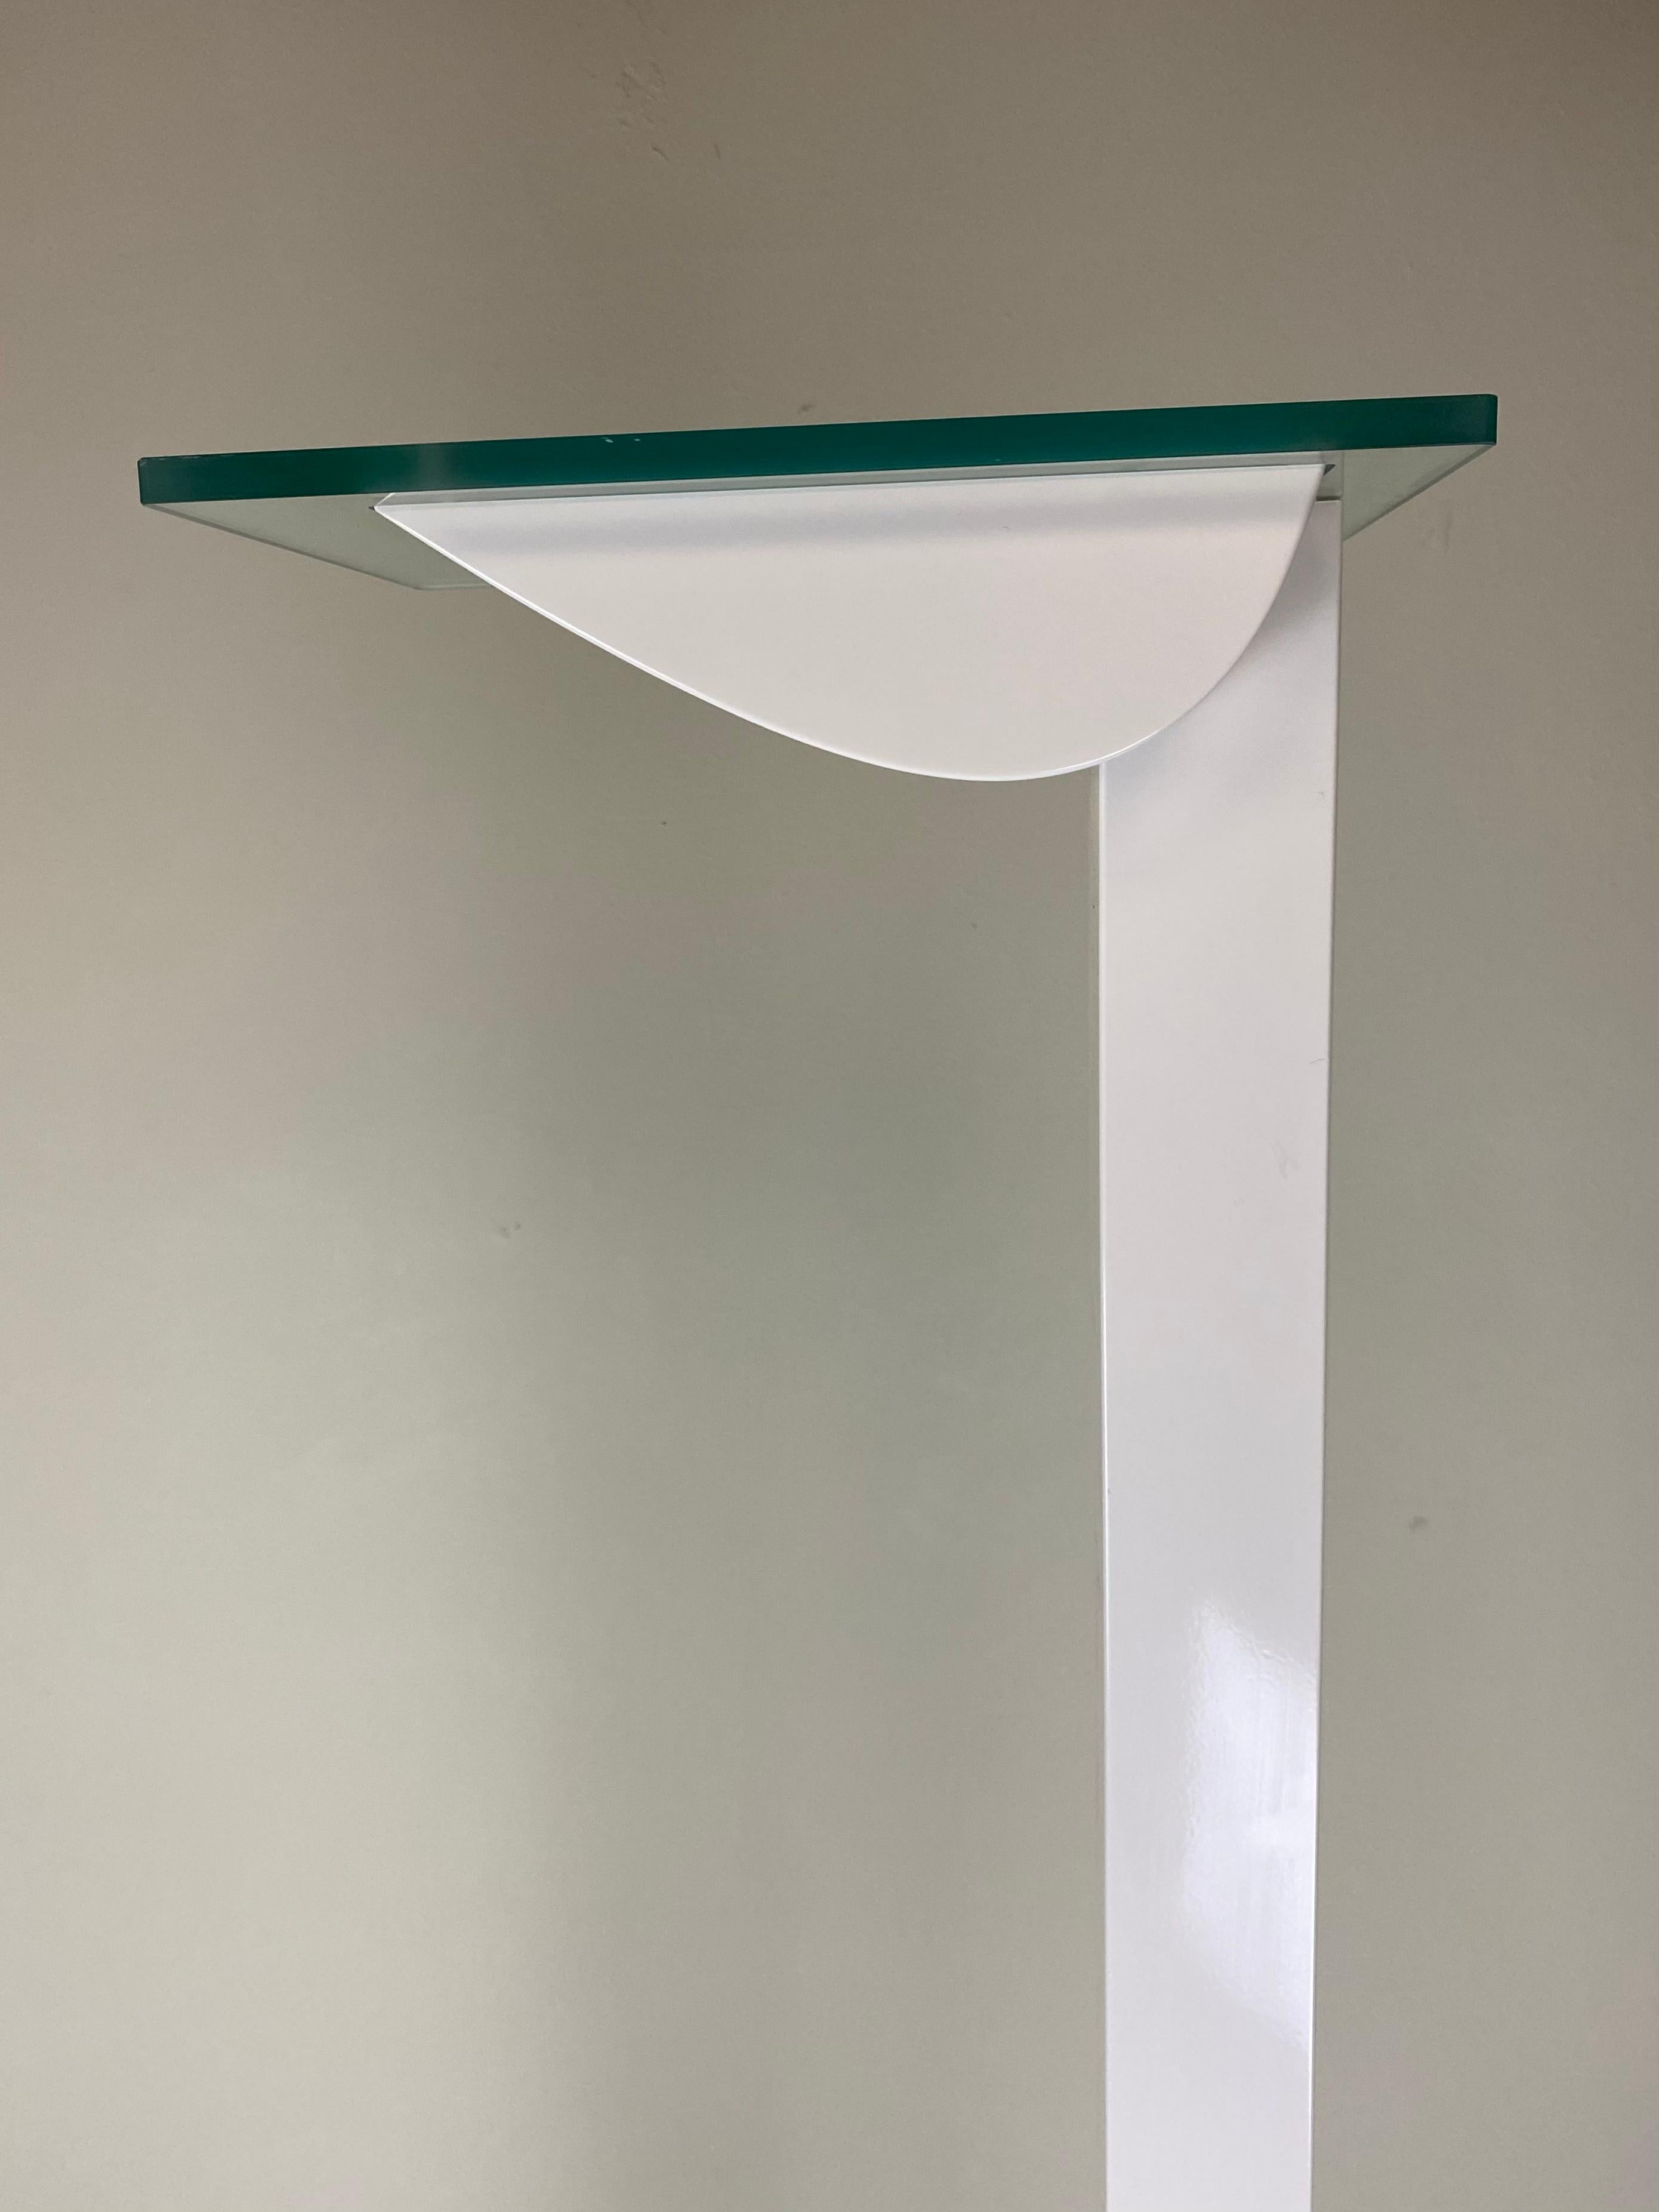 Designed by Ettore Sottsass in the early 1980s, this rare ID-S Floor Lamp was firstly produced by Staff Leuchten until the company got taken over by the Austrian company Zumtobel. 

Ettore Sottsass was born in Innsbruck, Austria, but soon moved to